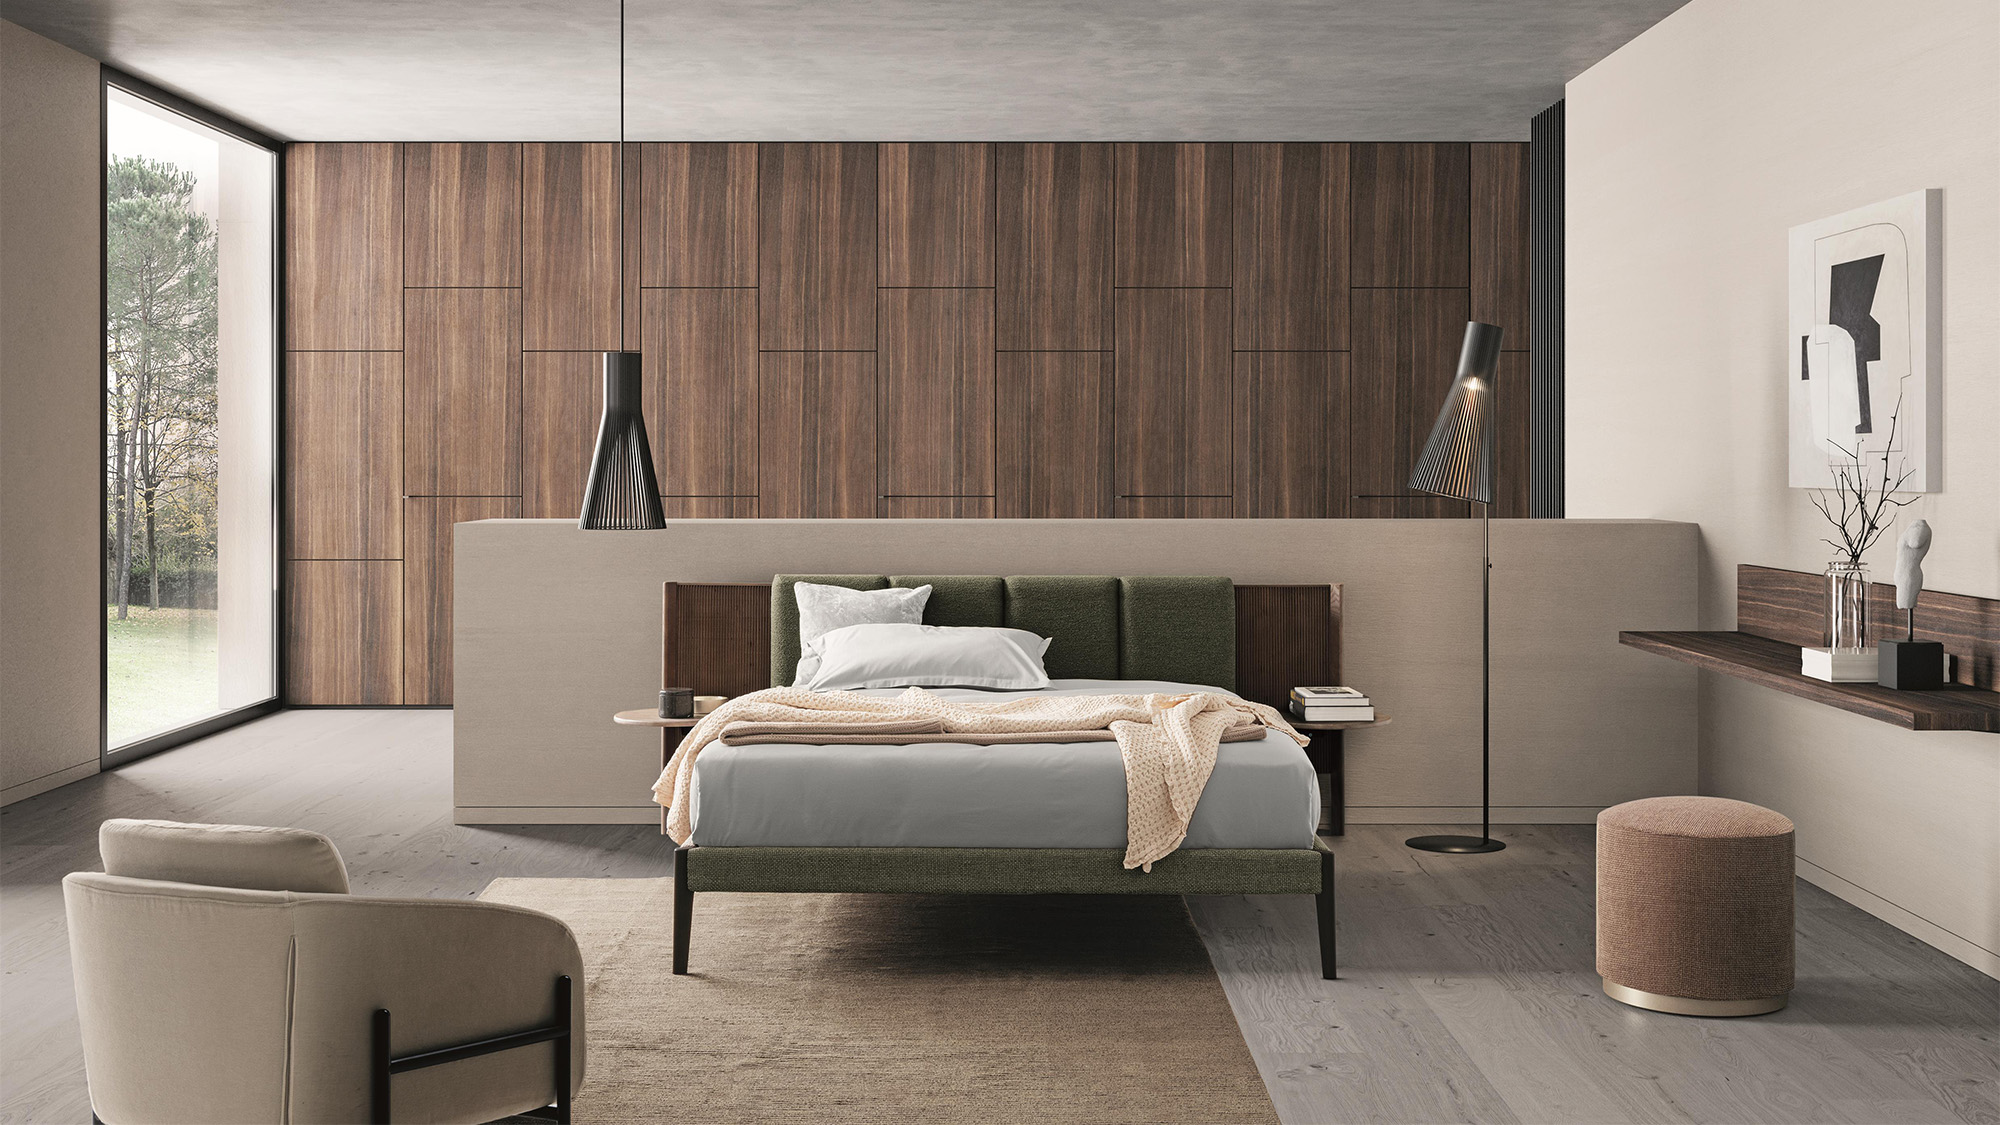 Bedroom with Millerighe bed, Boiserie wardrobe and Supernova armchair | Dallagnese